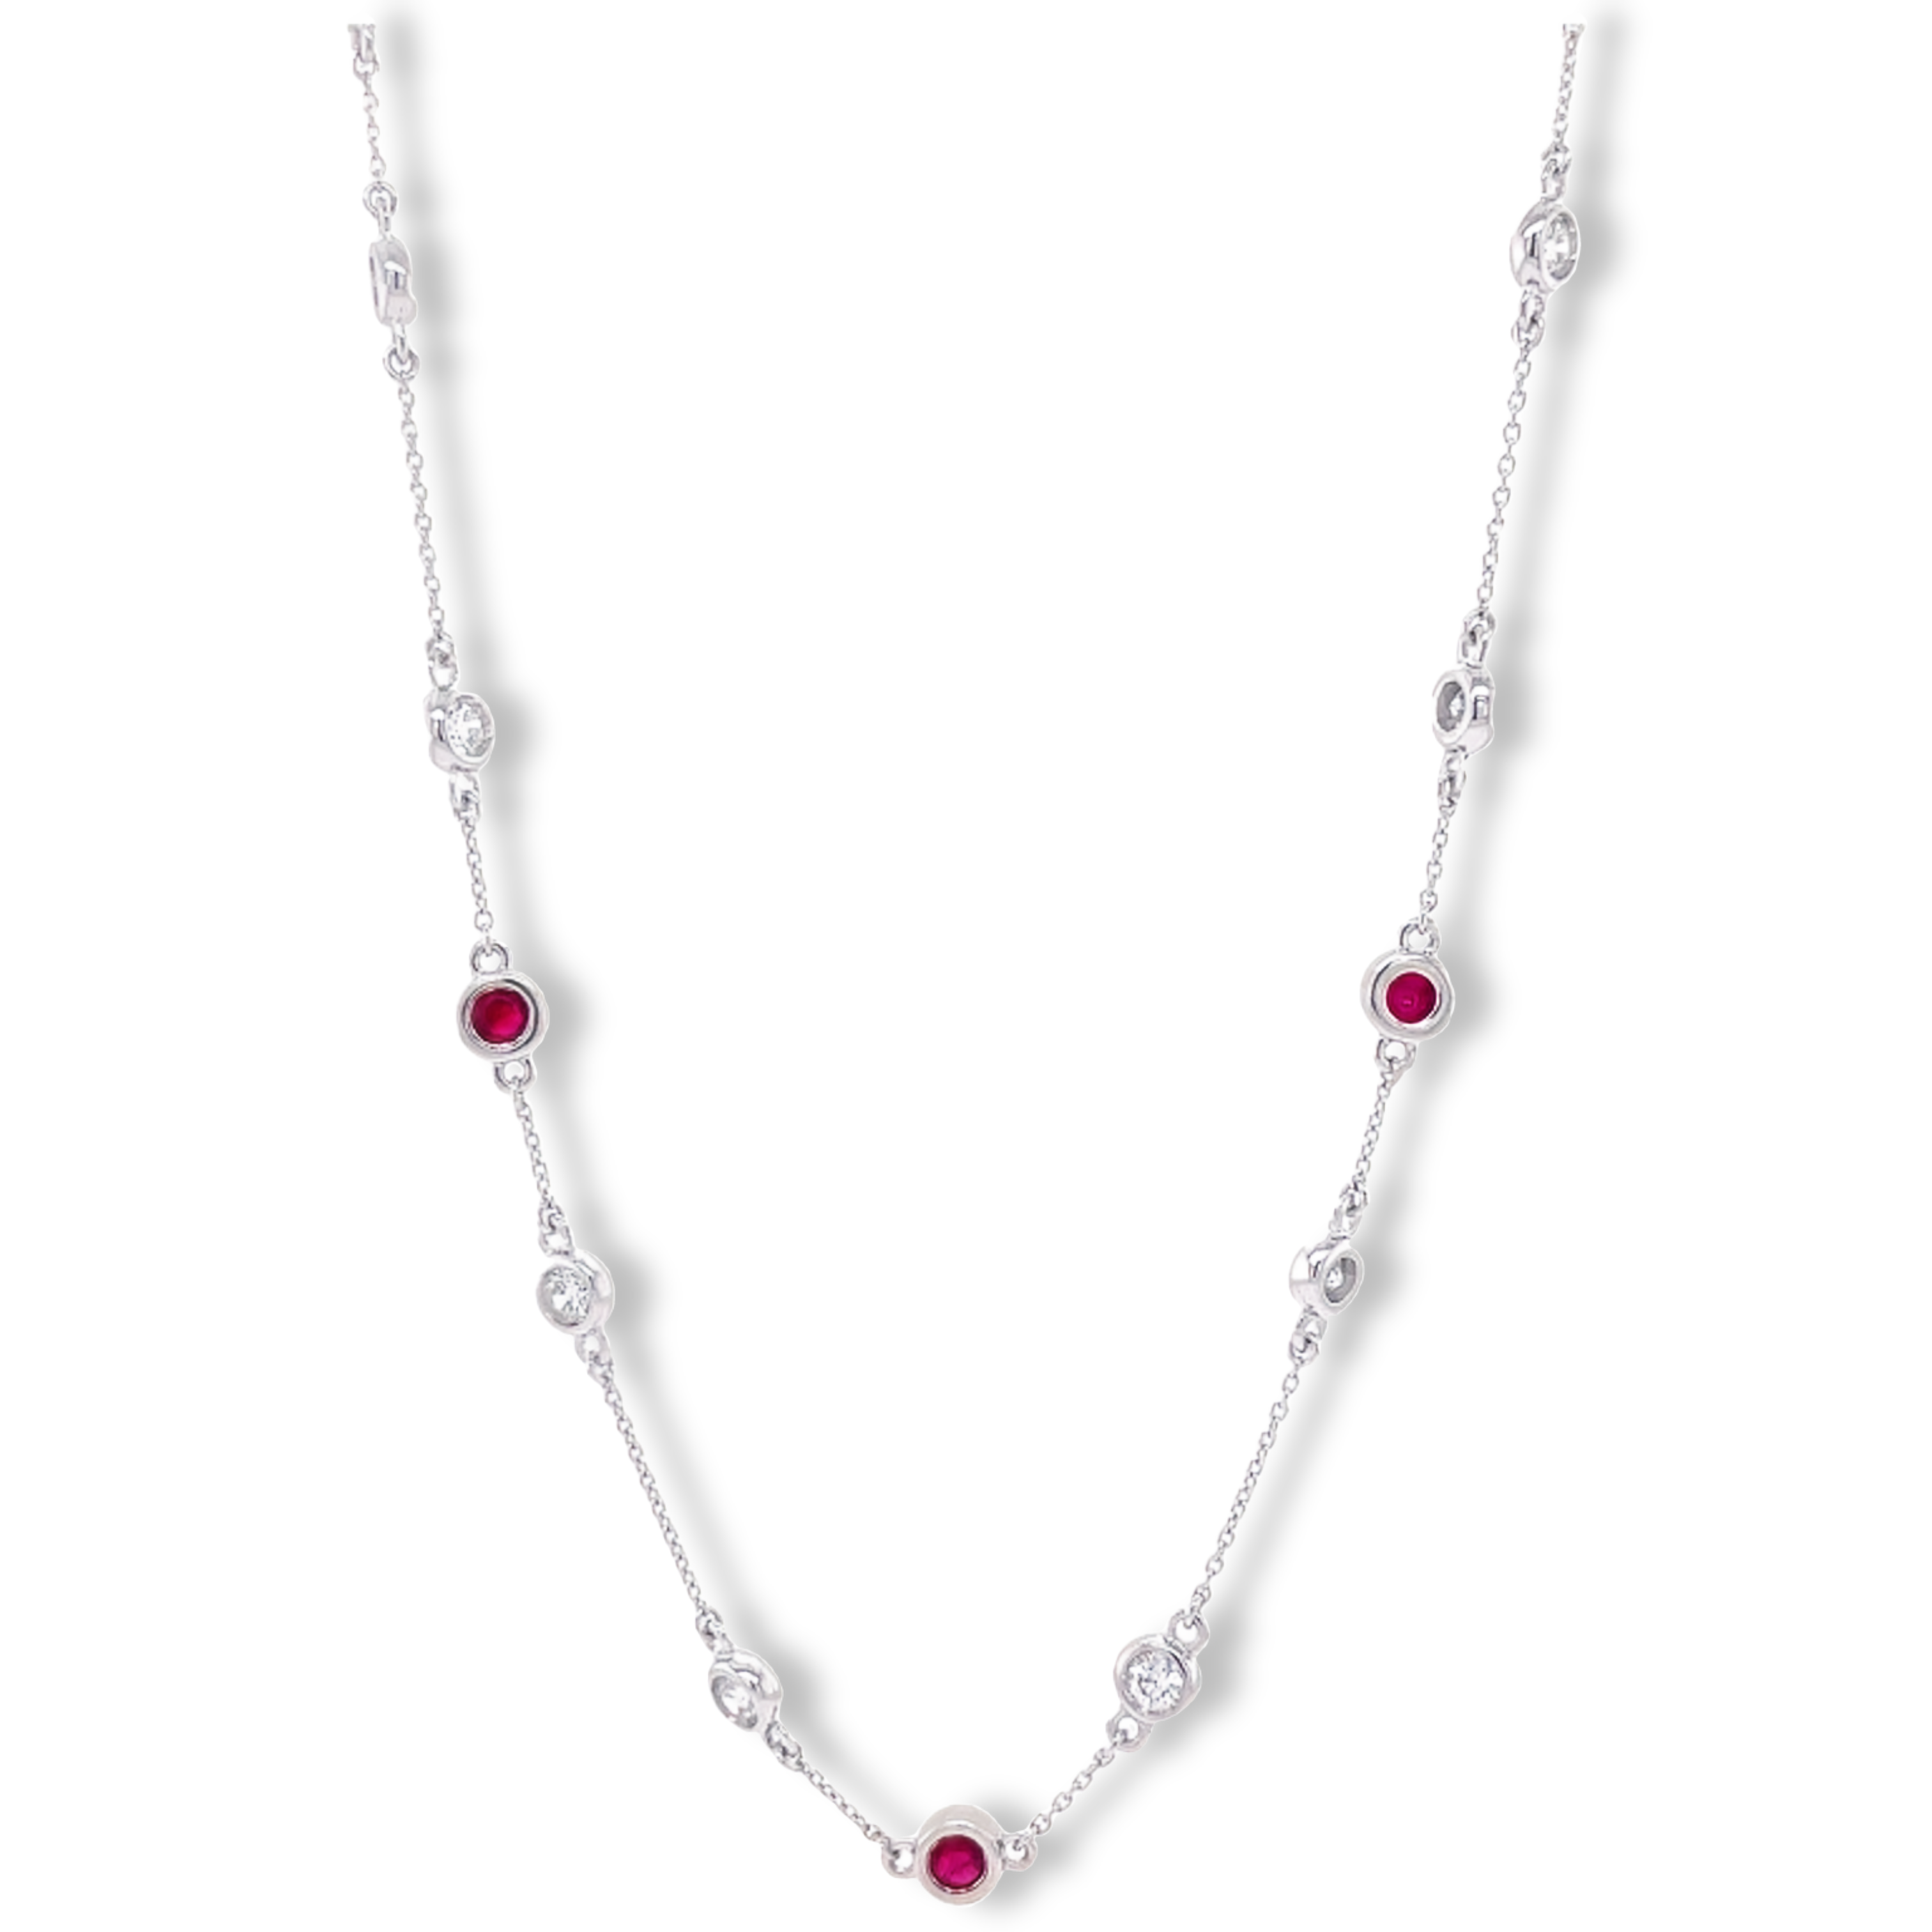 14 round diamond 1.60 cts  7 round rubies 0.75 cts.  Secure lobster catch  20" long   14k white gold  Three sizing loops